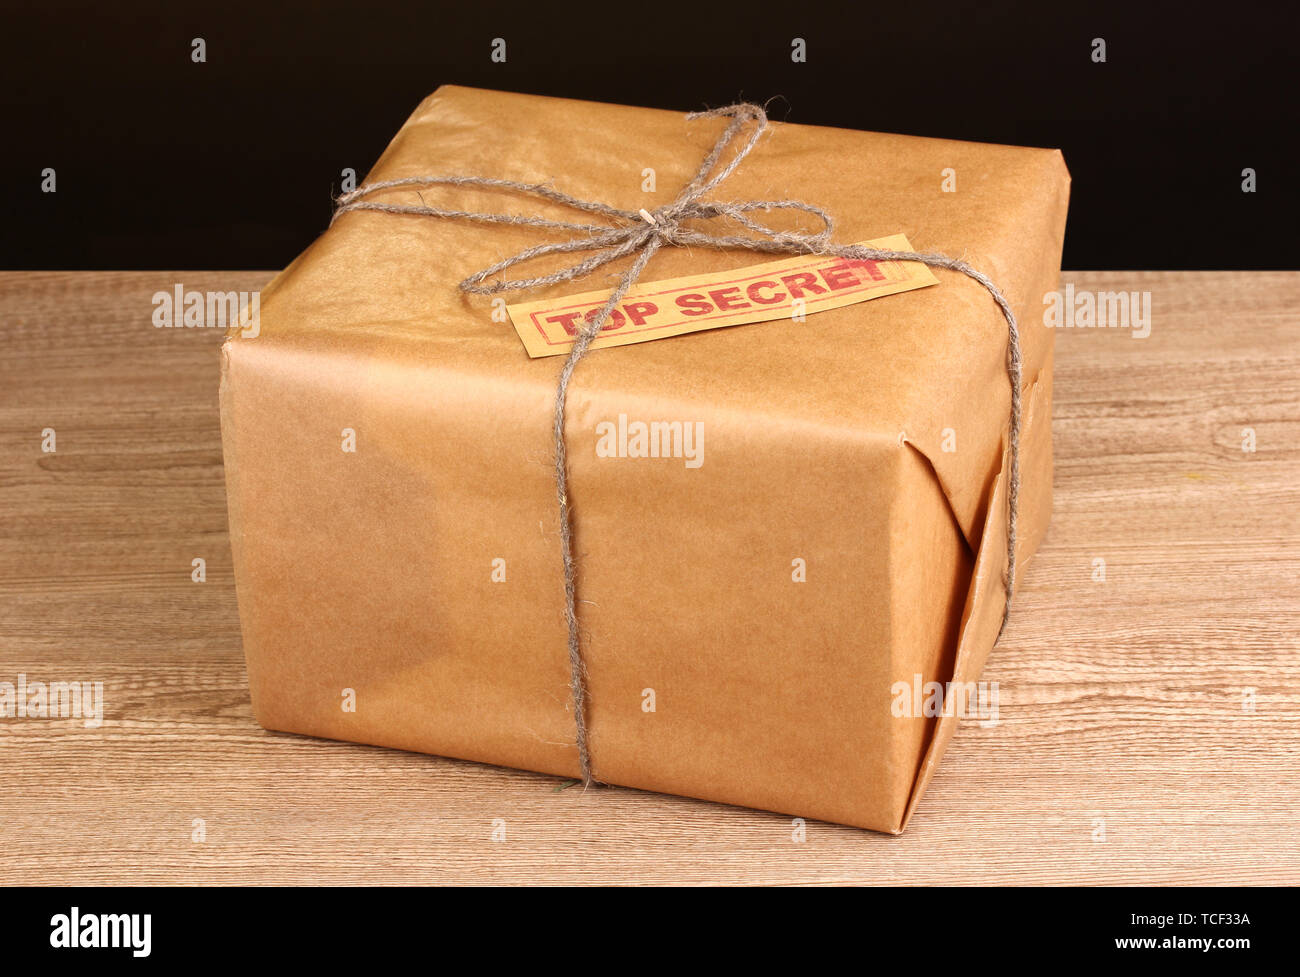 Parcel with top secret stamp on wooden table on brown background Stock Photo